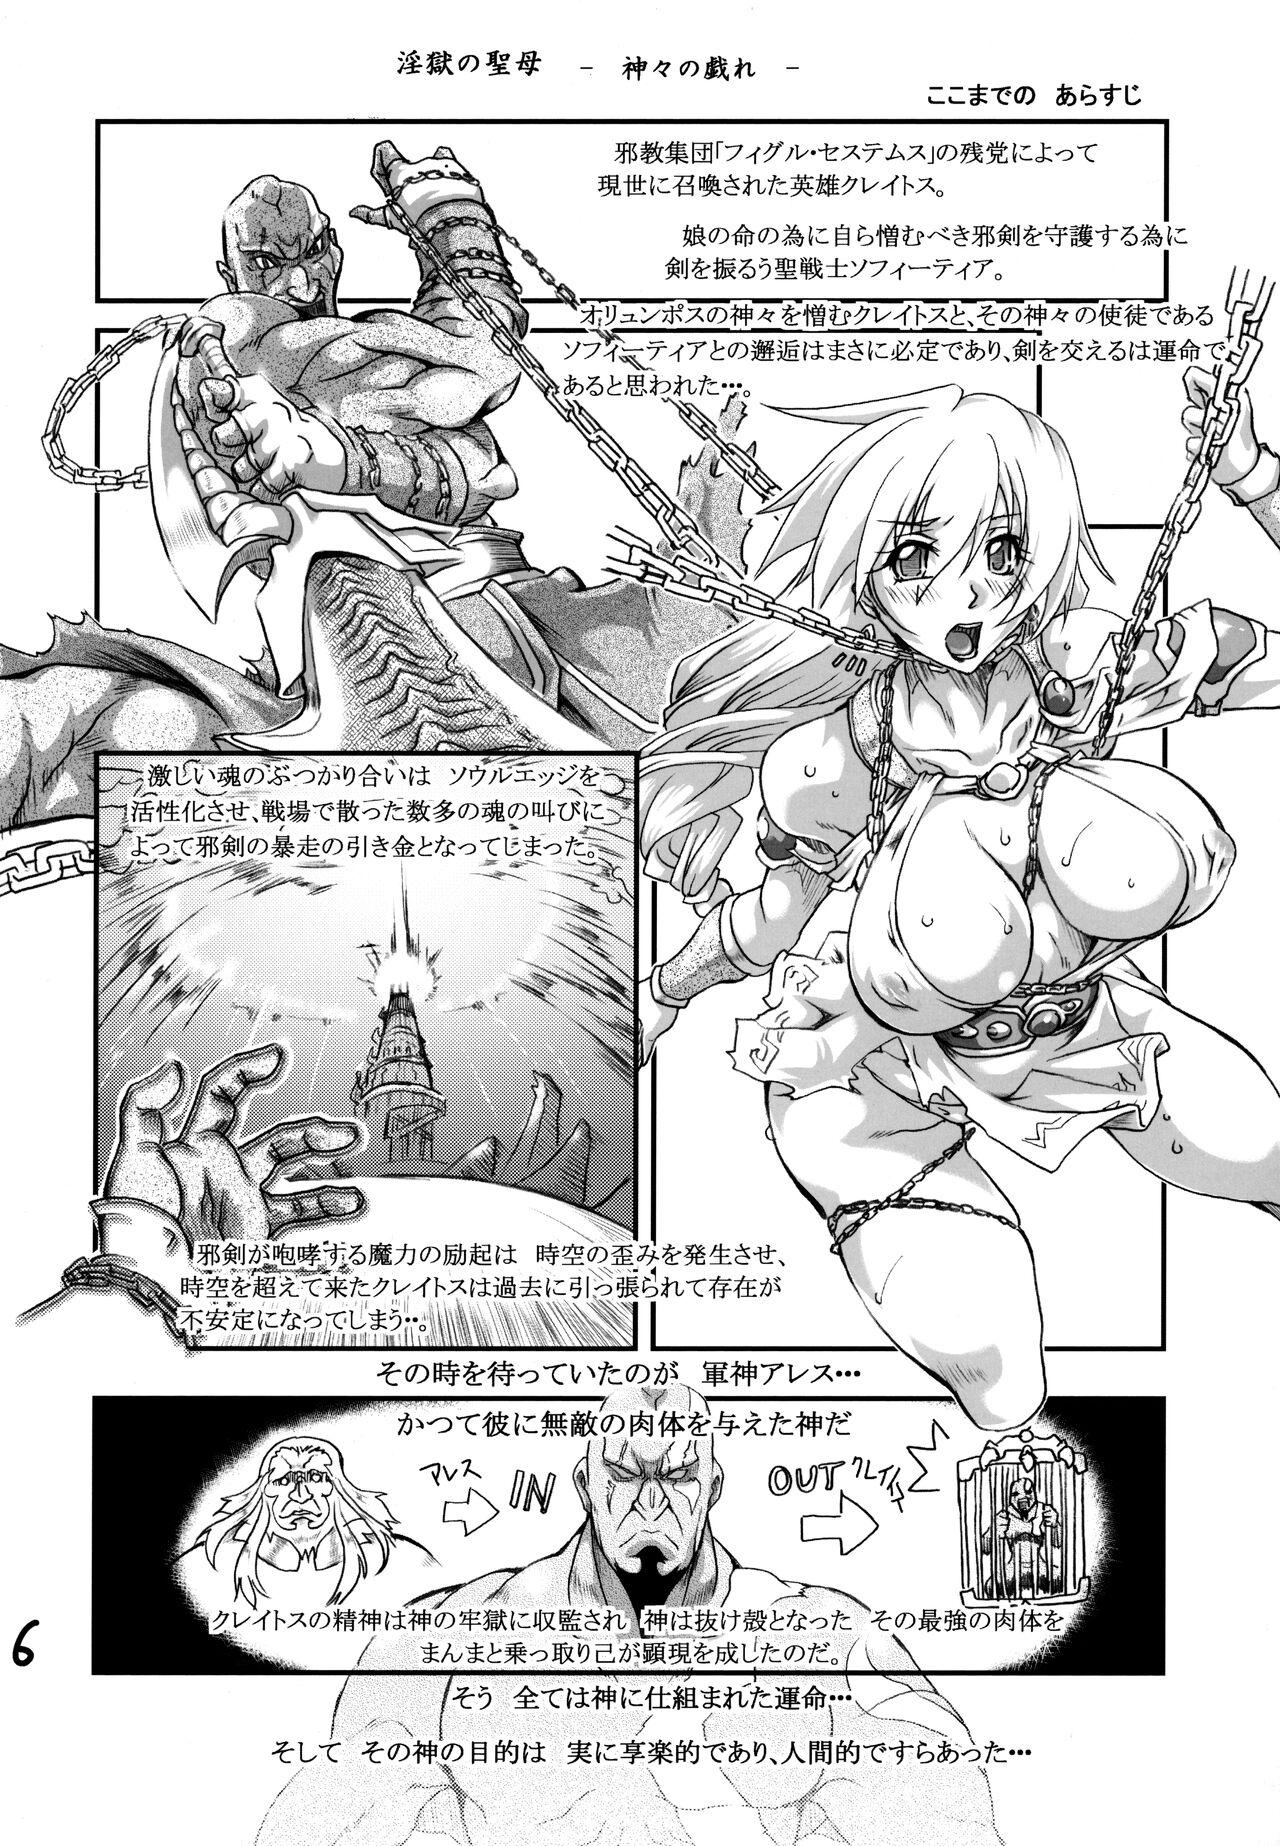 Amature Porn 淫獄の聖母 神々の戯れ 追憶篇 - Soulcalibur Small Boobs - Page 5